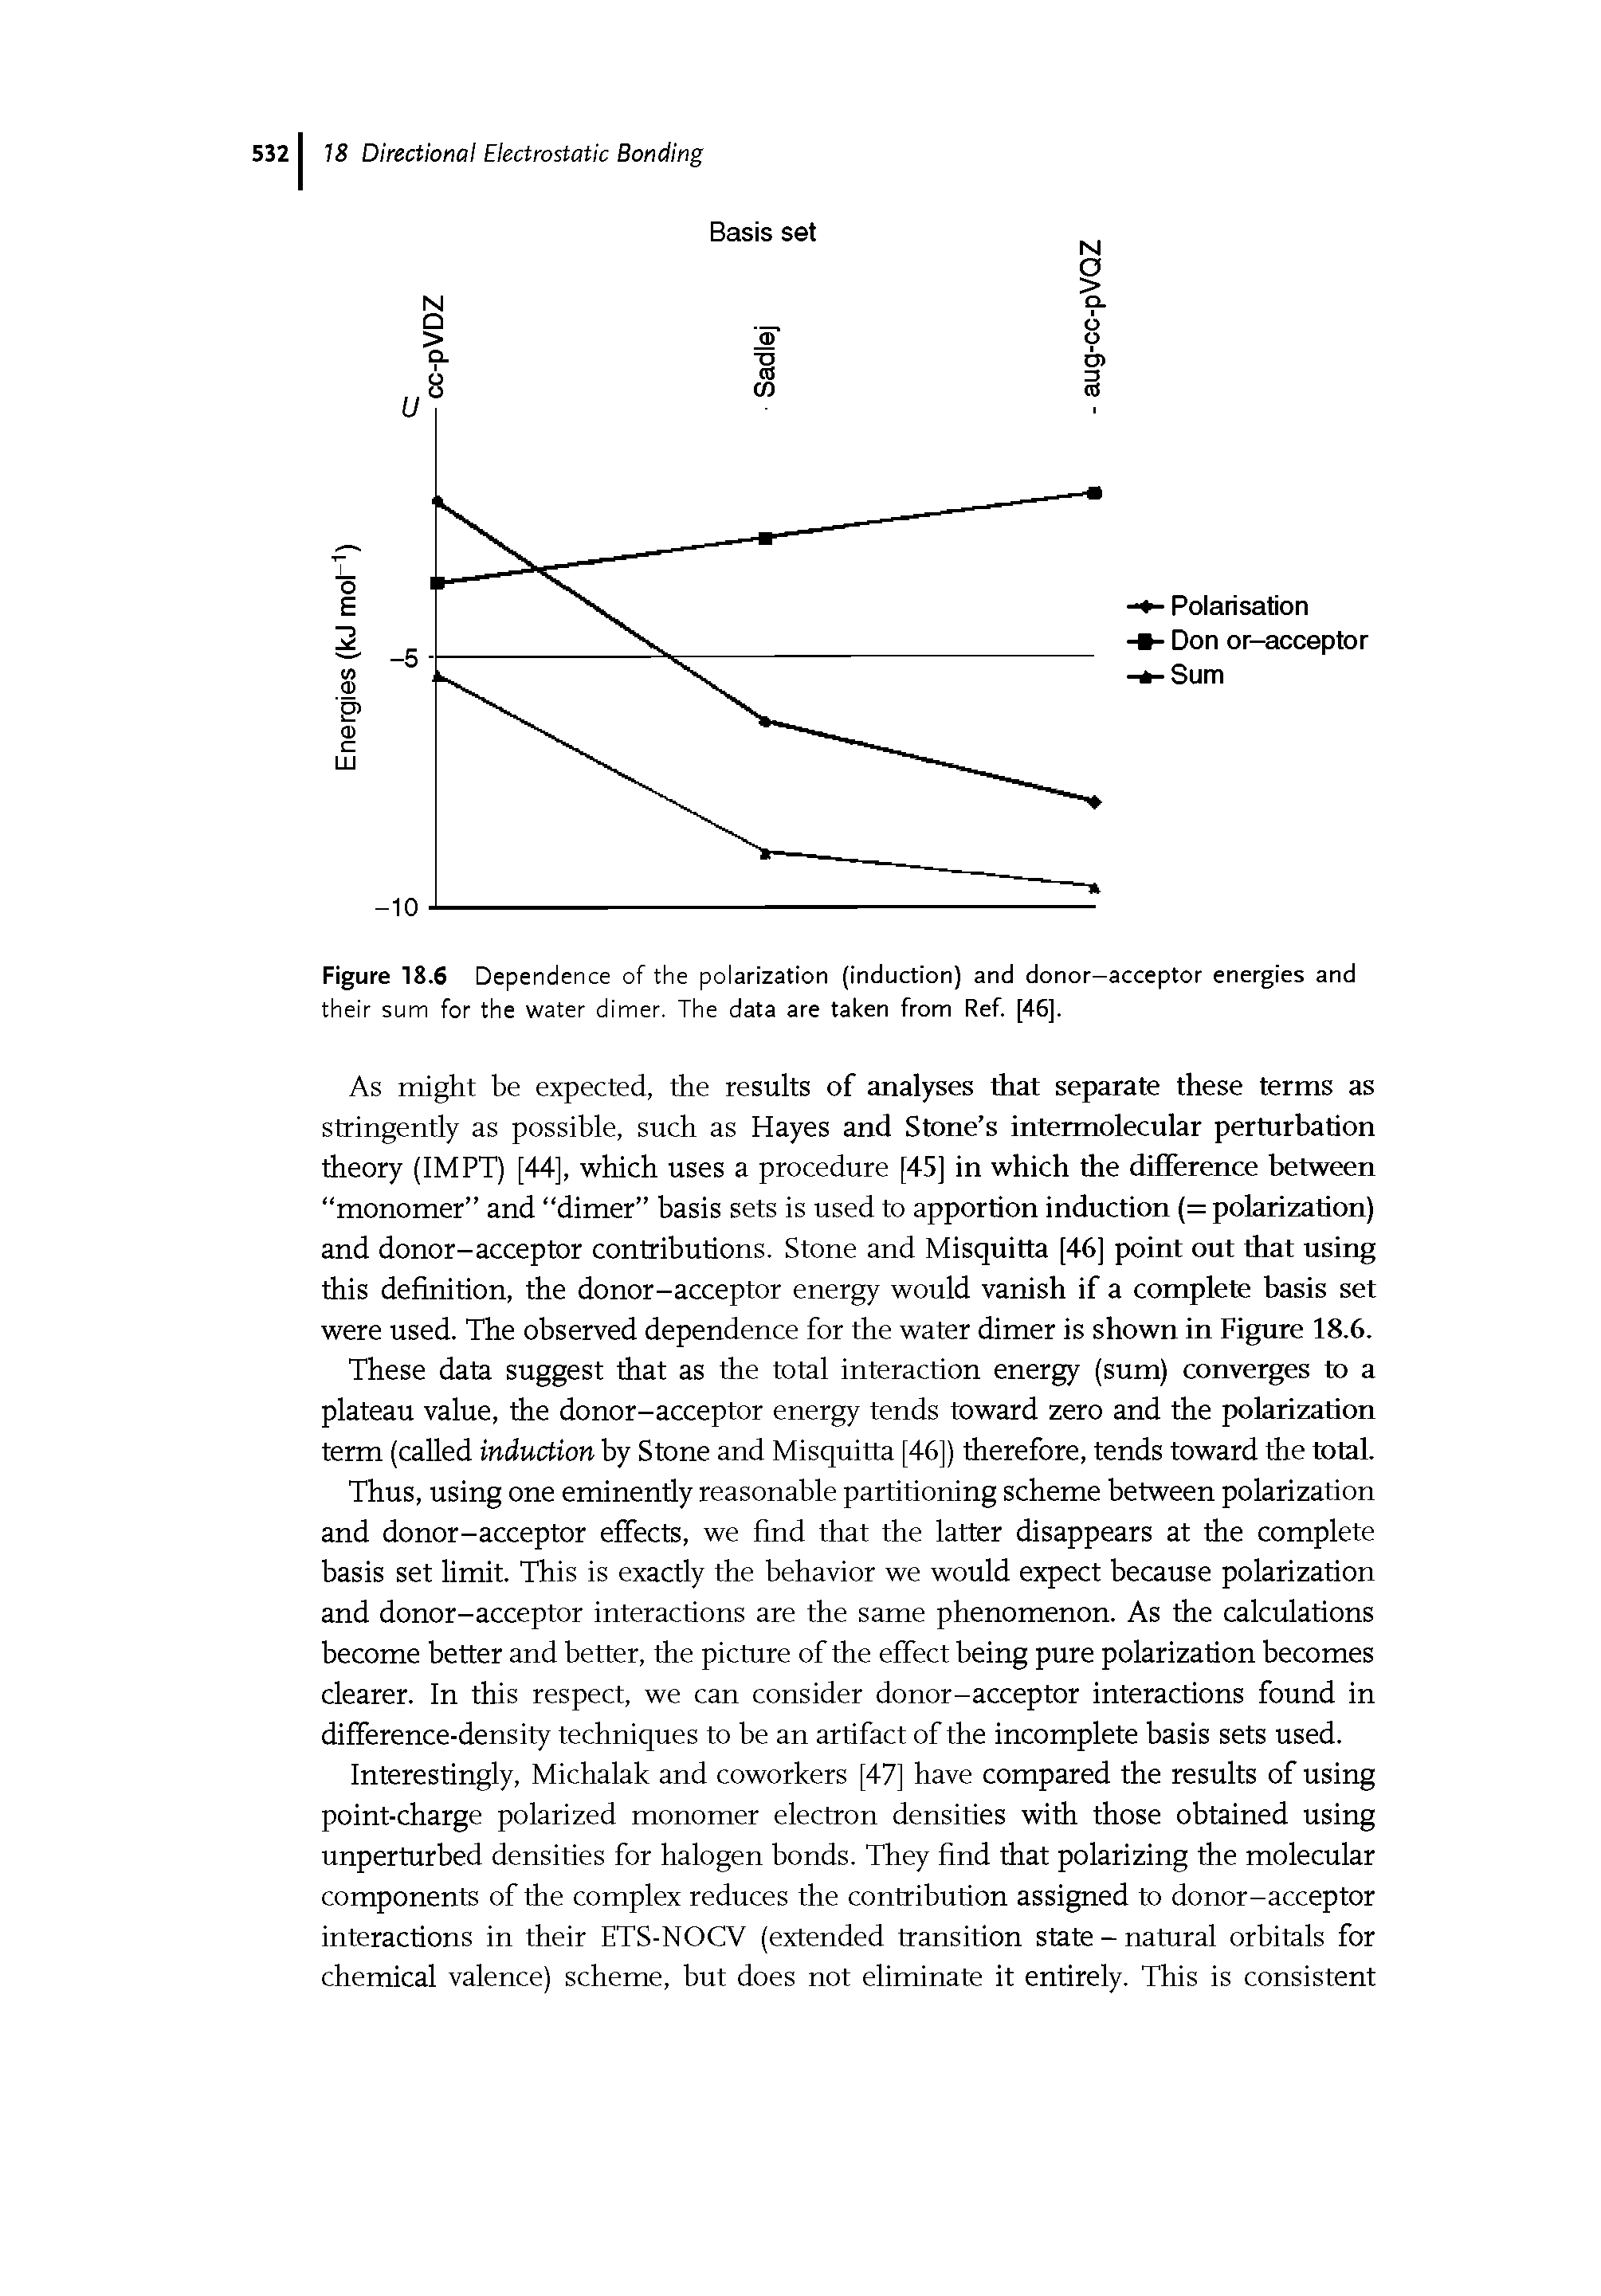 Figure 18.6 Dependence of the polarization (induction) and donor-acceptor energies and their sum for the water dimer. The data are taken from Ref. [46].